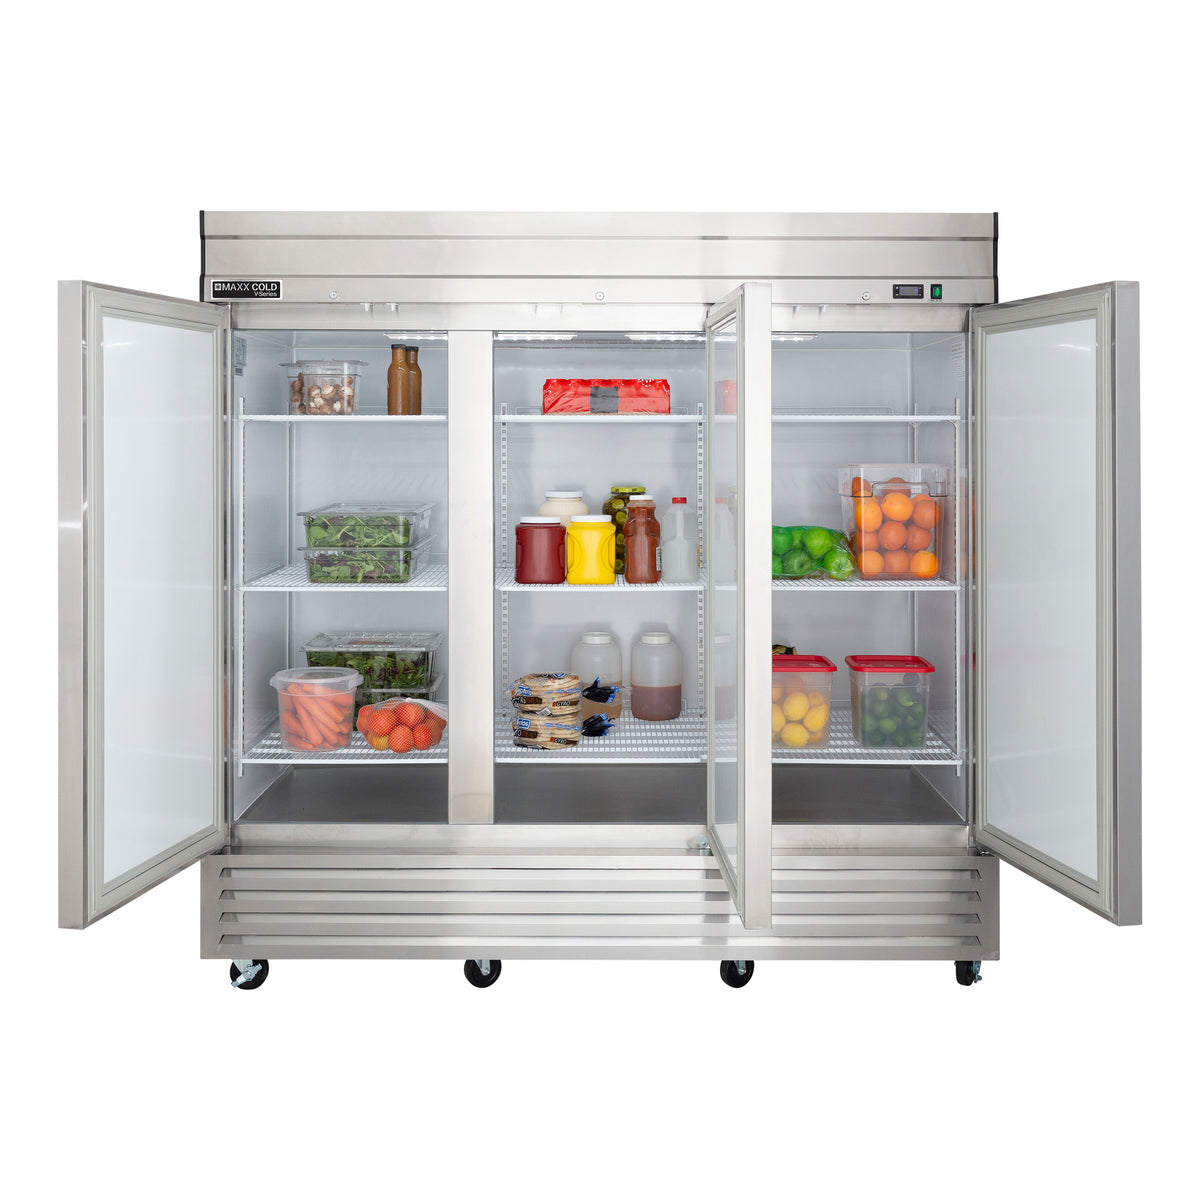 Maxx Cold MVR-72FD V-Series 3 Solid Door Reach-In Refrigerator, Bottom Mount, 81"W, 65 cu. ft. Storage Capacity, in Stainless Steel (MVR-72FDHC)